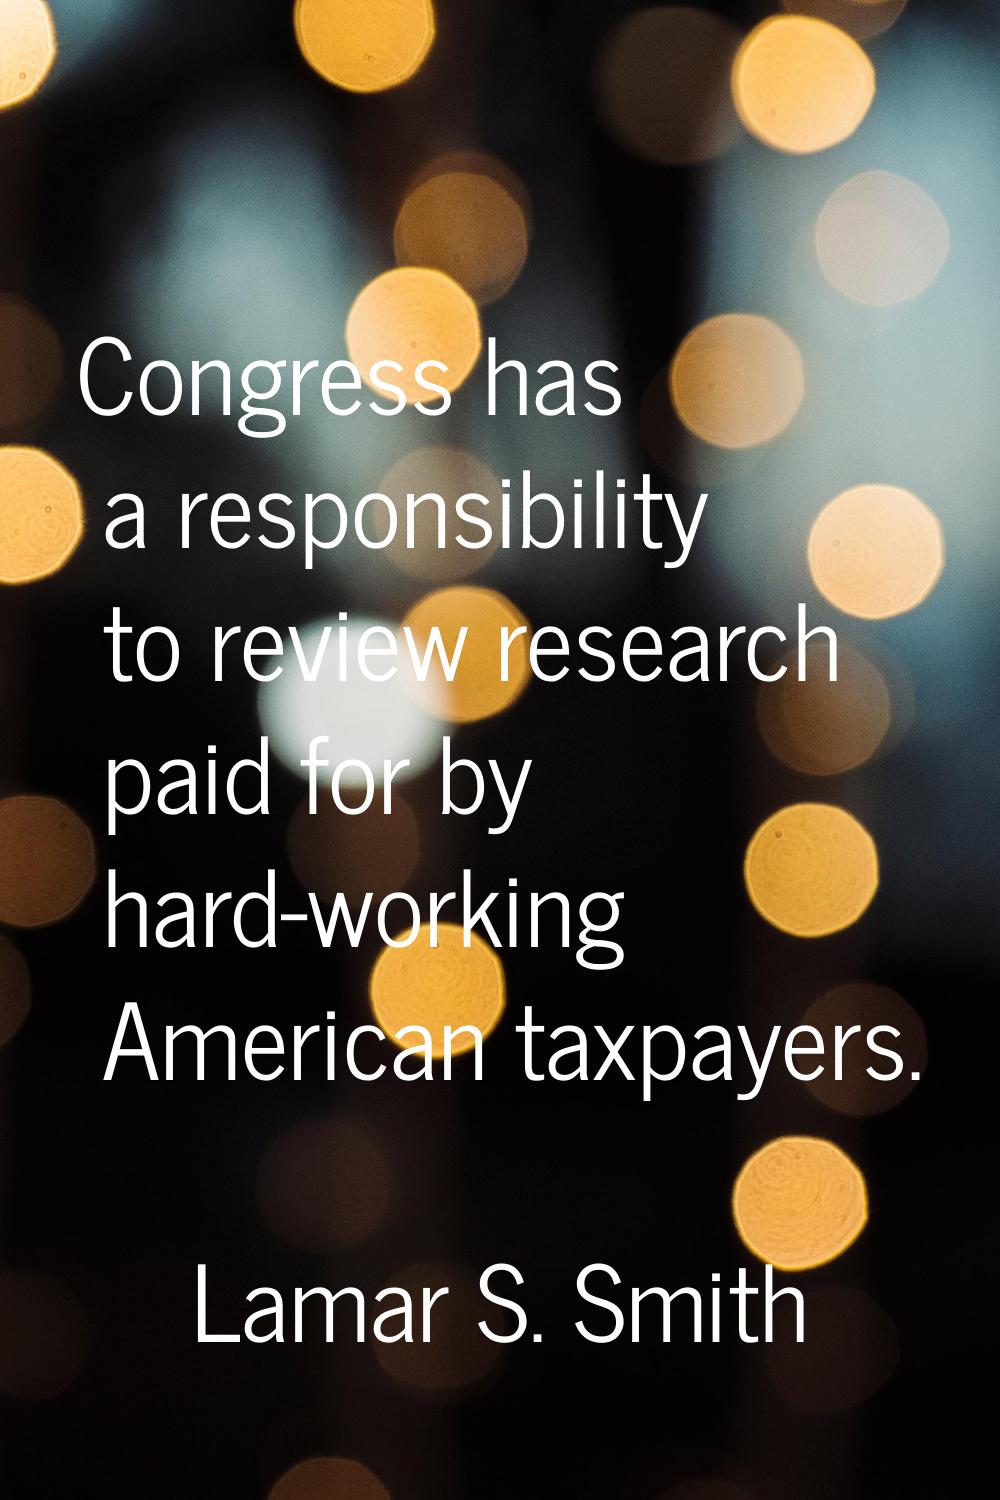 Congress has a responsibility to review research paid for by hard-working American taxpayers.